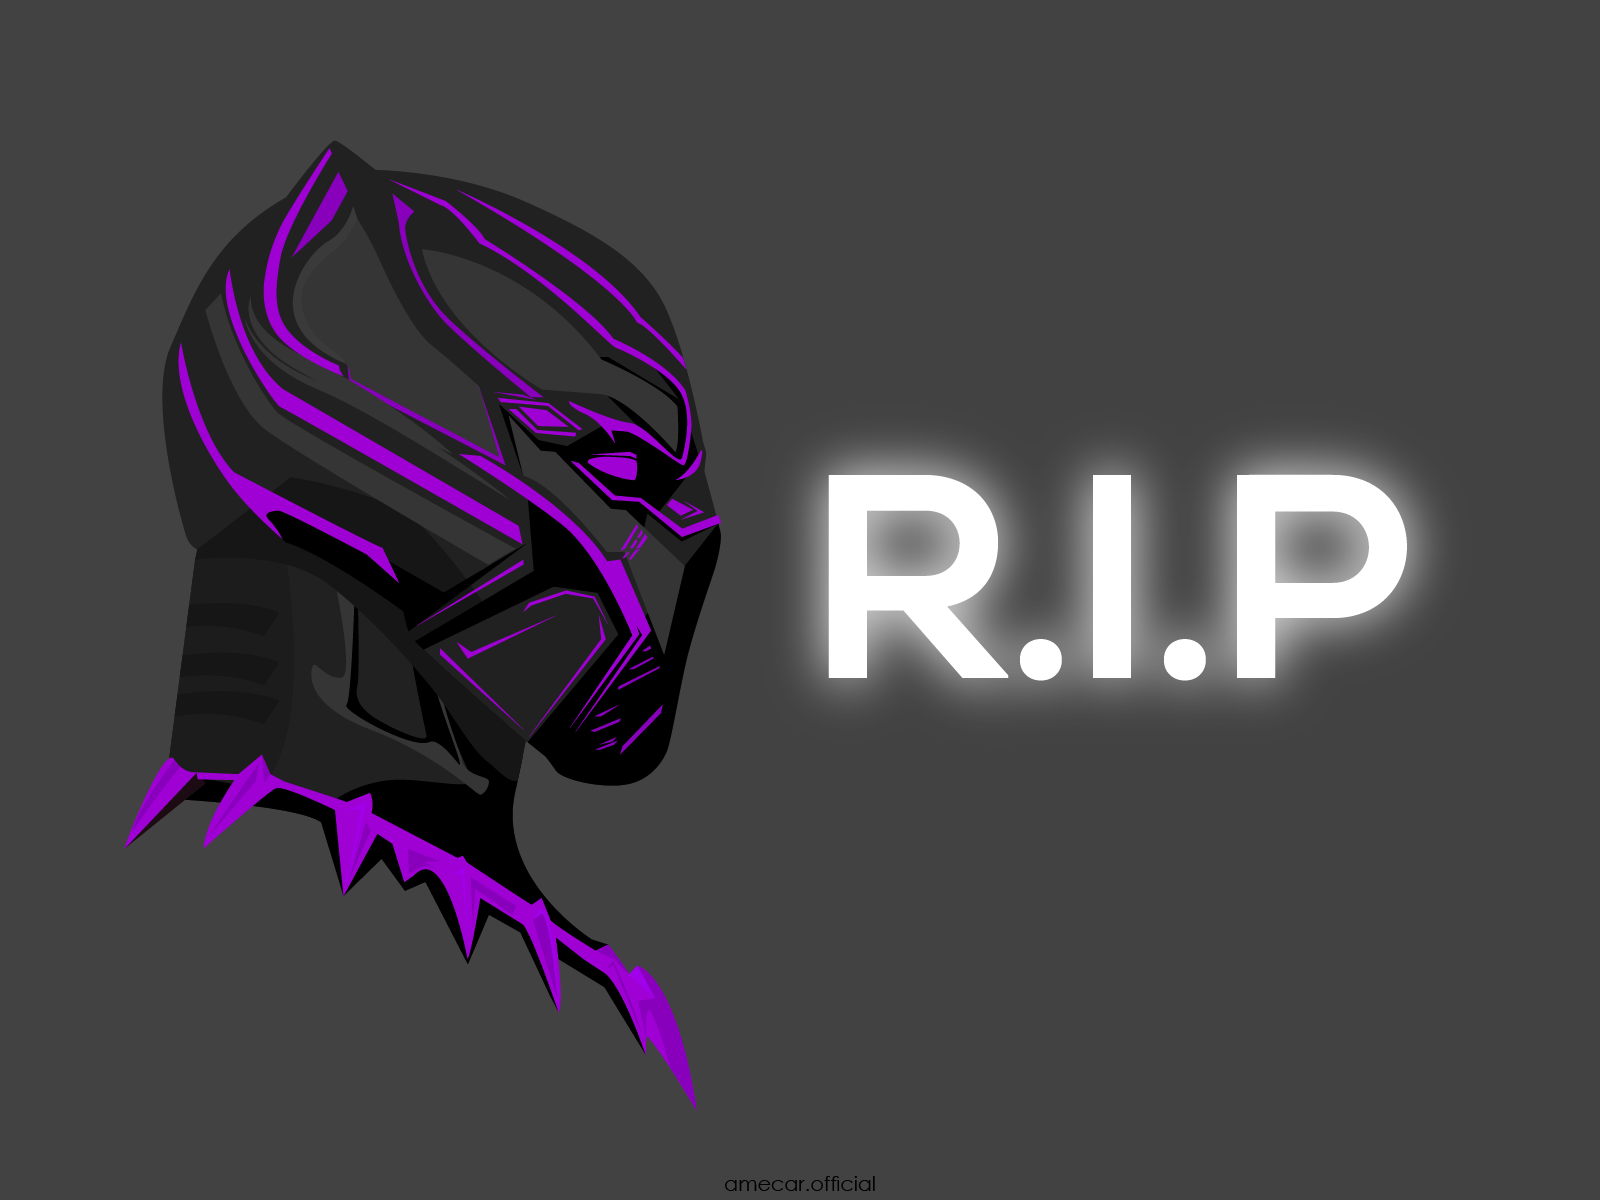 Rip Black Panther Wallpapers Top Free Rip Black Panther Backgrounds Wallpaperaccess